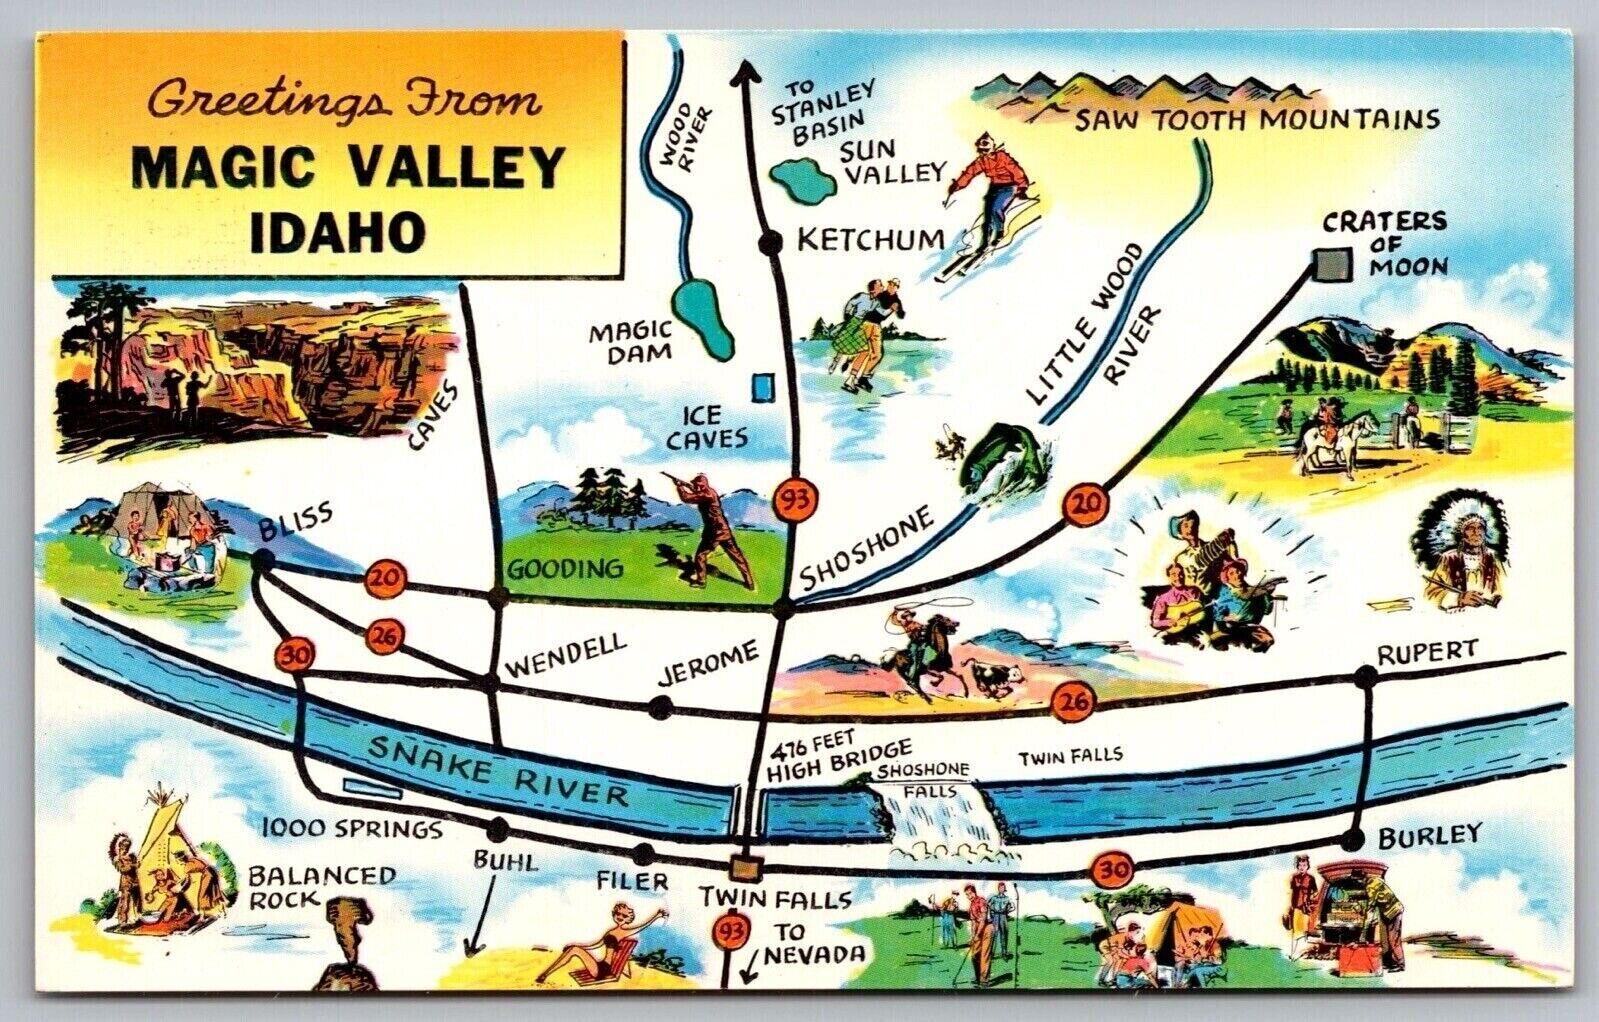 Greetings Magic Valley Idaho Saw Tooth Mountains Little Wood River VNG Postcard